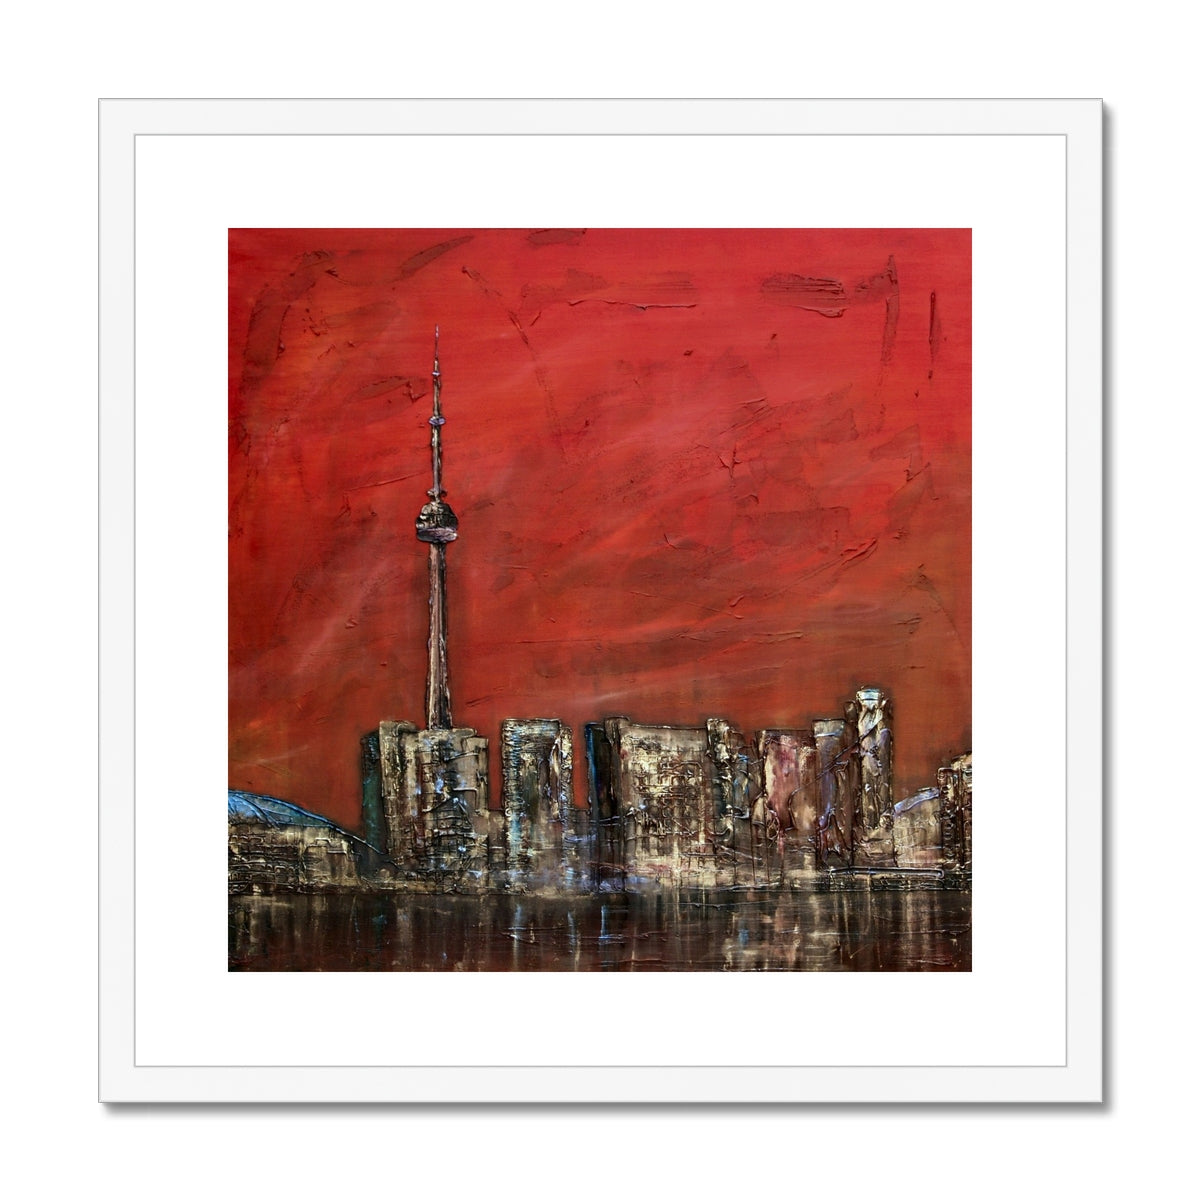 Toronto Sunset Painting | Framed & Mounted Prints From Scotland-Framed & Mounted Prints-World Art Gallery-20"x20"-White Frame-Paintings, Prints, Homeware, Art Gifts From Scotland By Scottish Artist Kevin Hunter